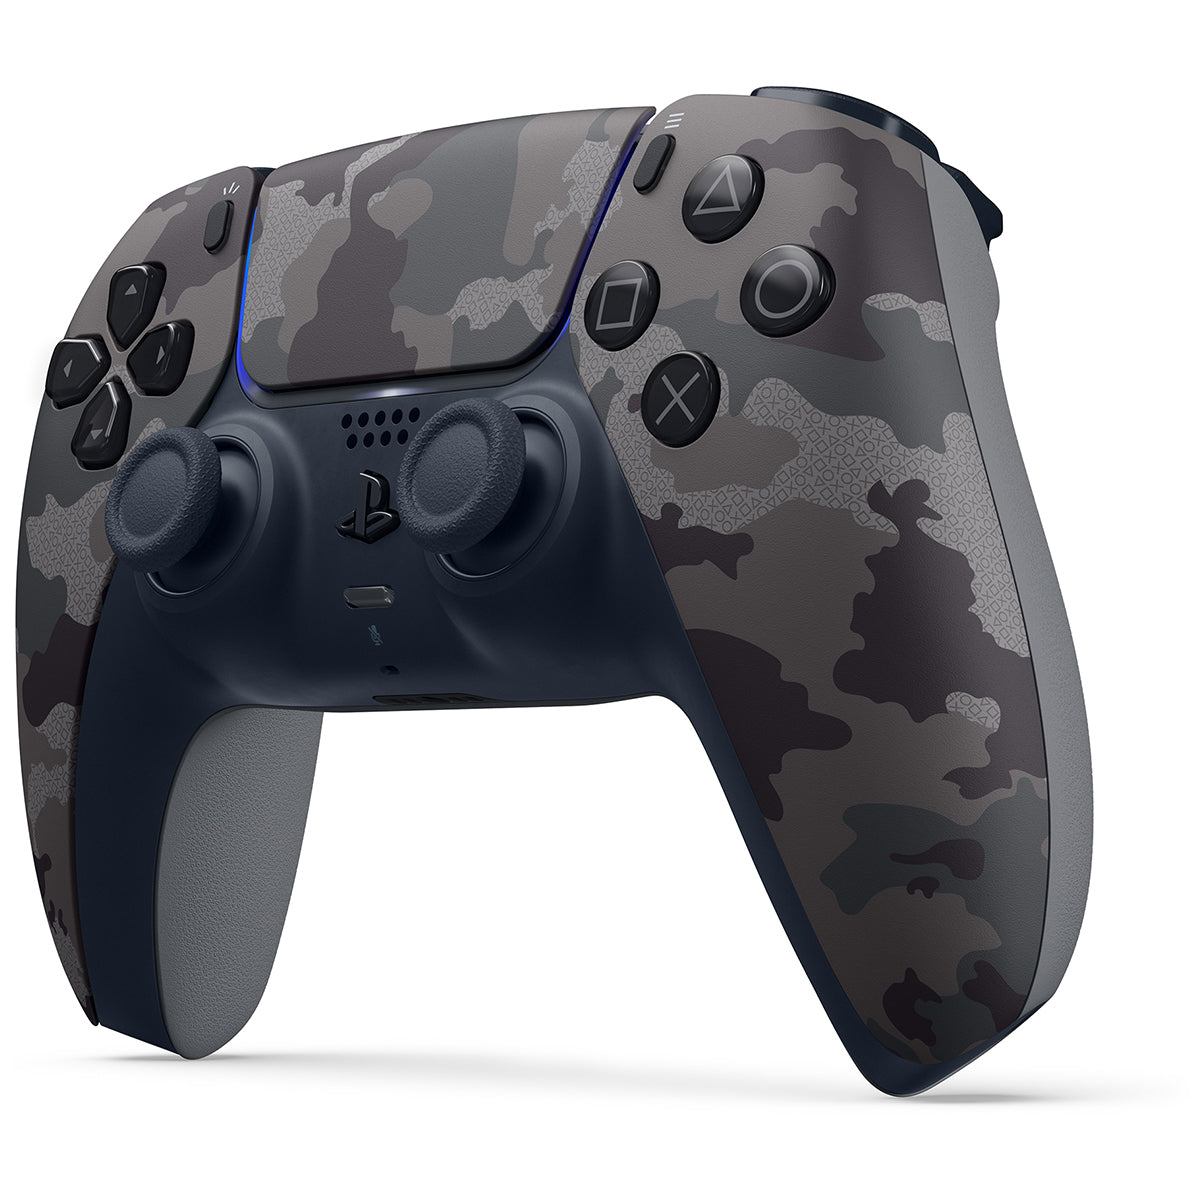 Sony Playstation 5 Disc Edition Bundle with Extra Gray Camo Controller, Black PULSE 3D Wireless Headset and FPS Grip Kit - Pro-Distributing